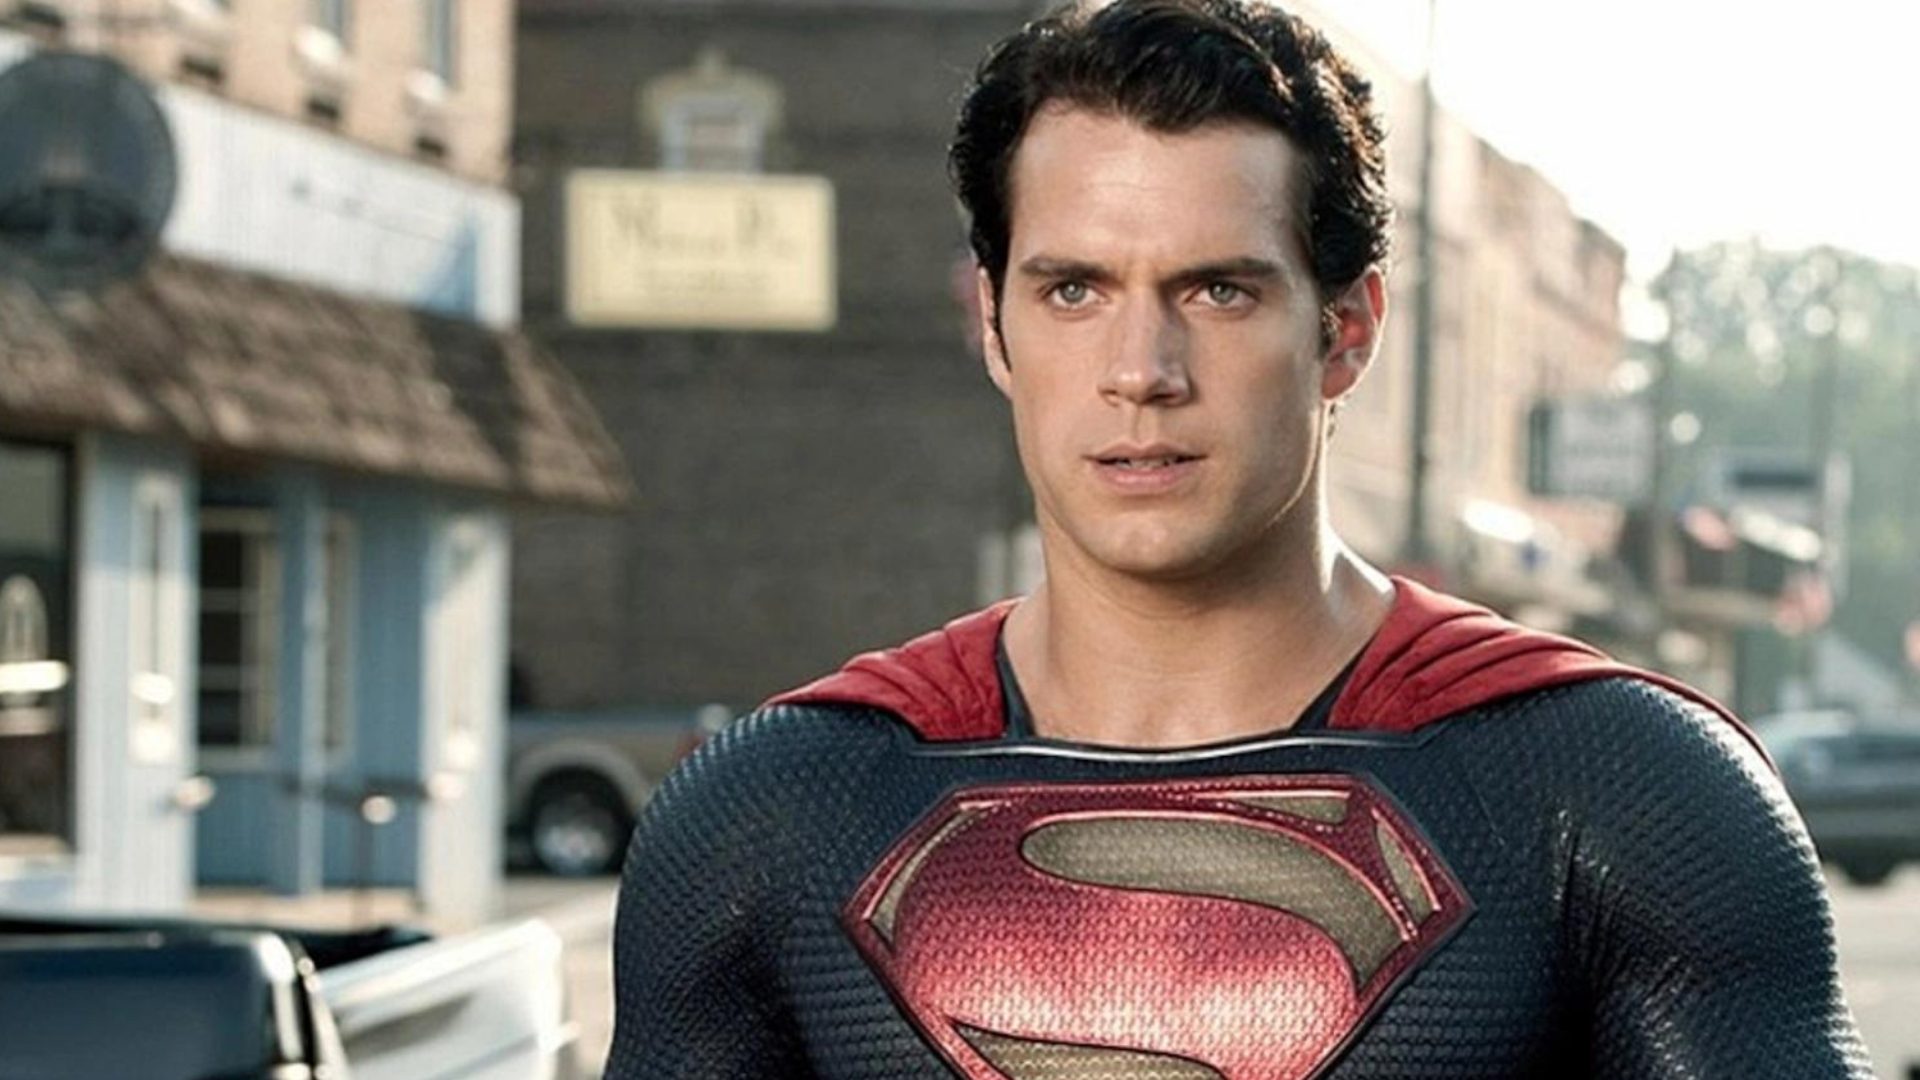 Henry Cavill Movies And Tv Shows 2022